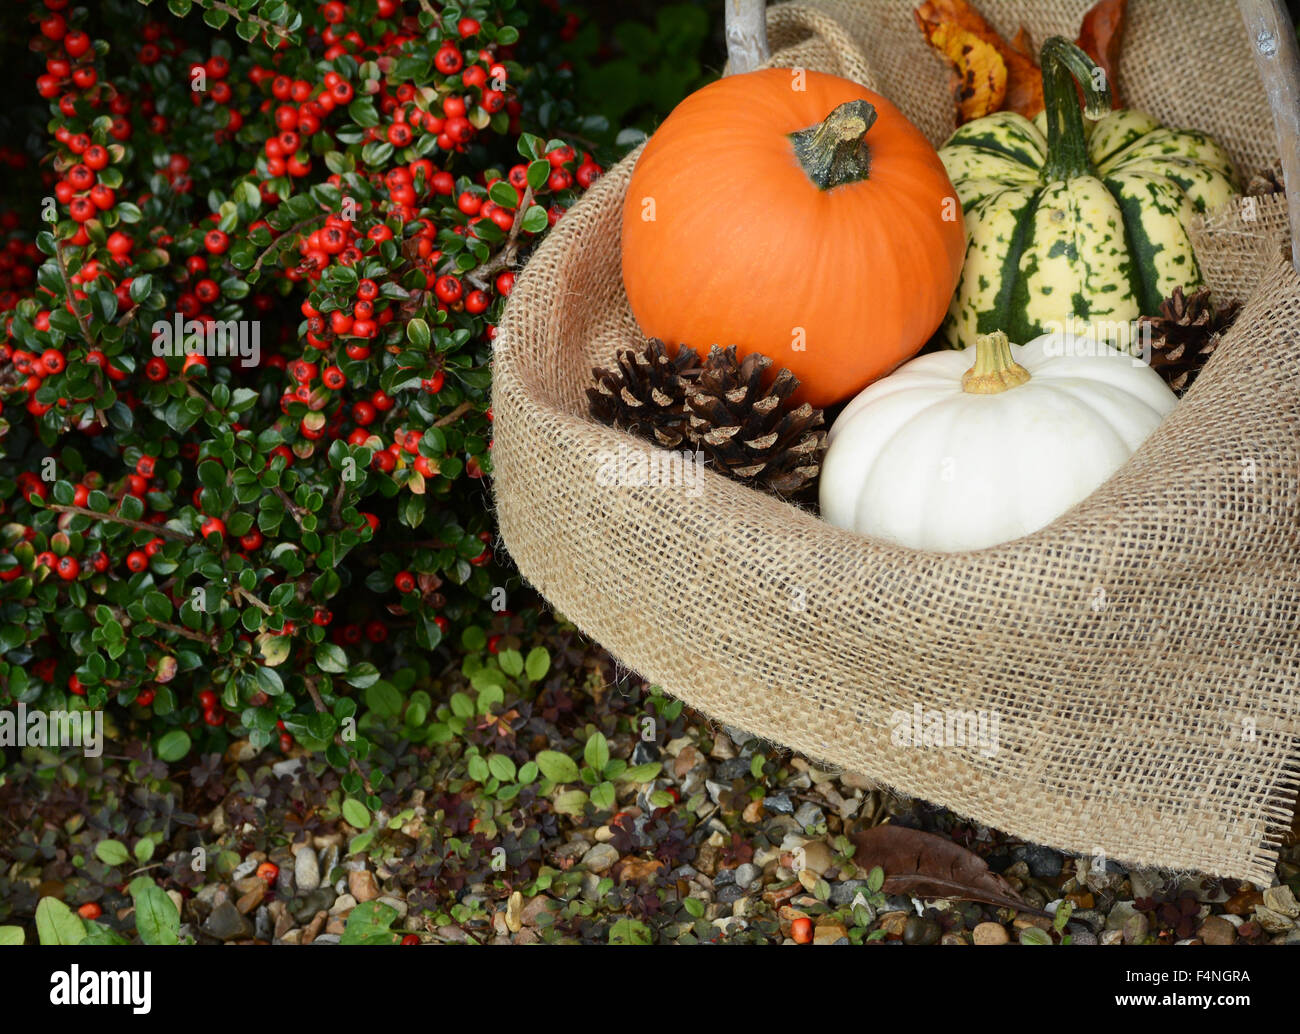 Rustic basket with orange sugar pumpkin and colourful gourds against a background of red cotoneaster berries Stock Photo